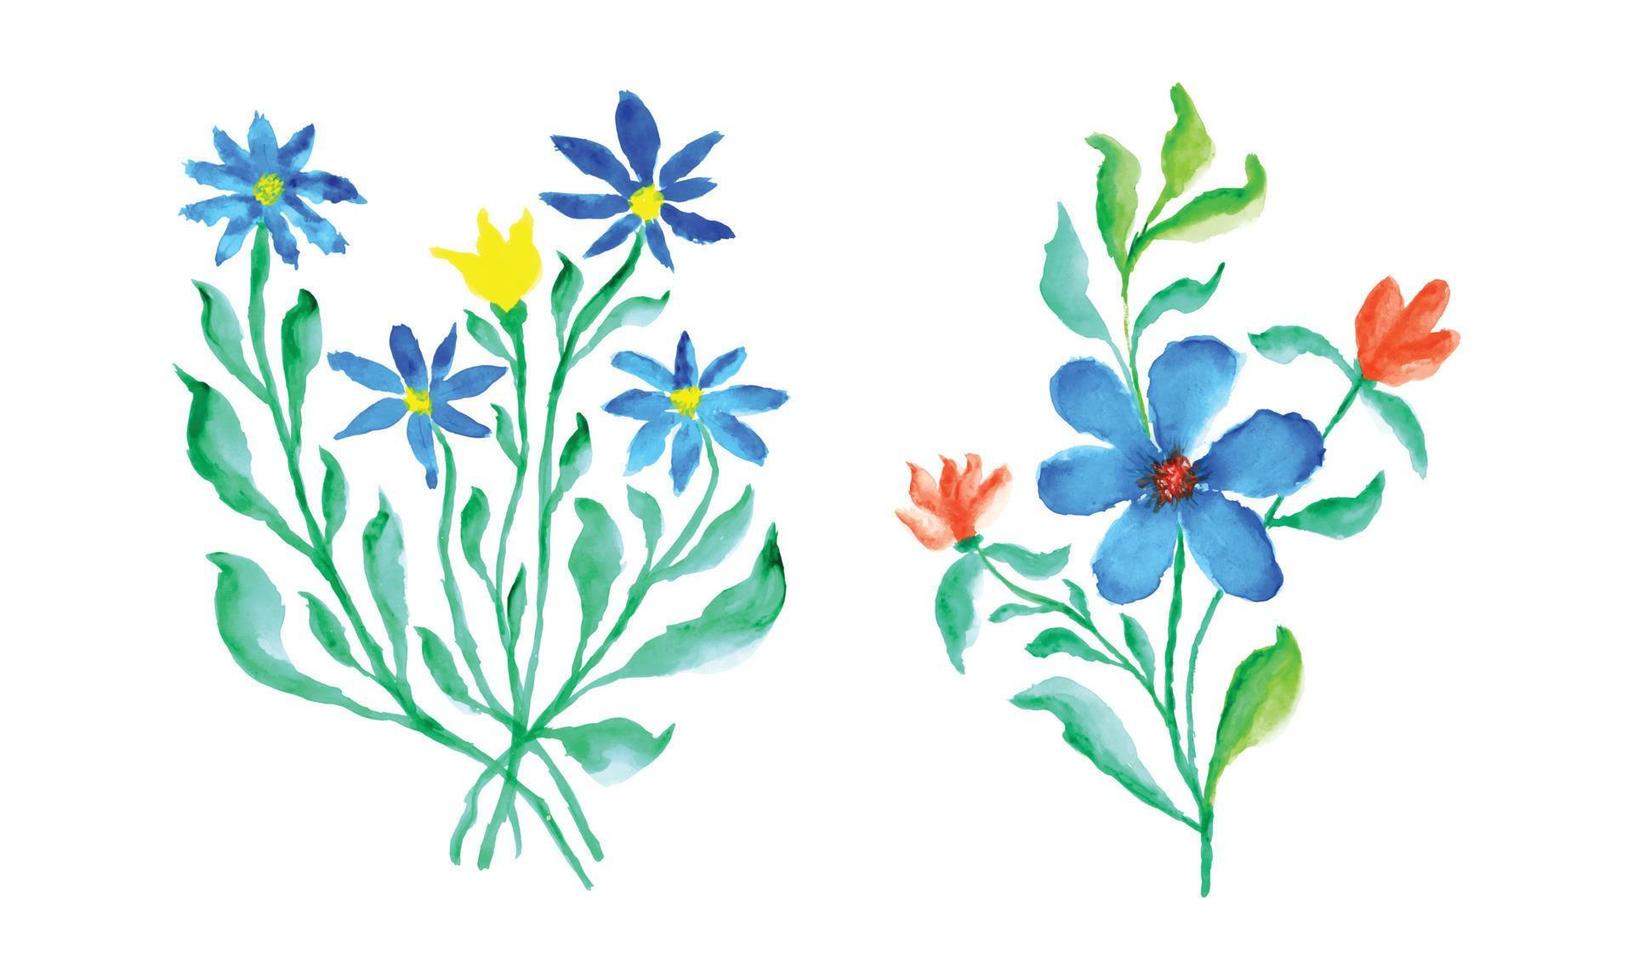 Two blue flowers on a white background. Watercolor painting of blue flowers with green leaves. Colorful watercolor flower design vector